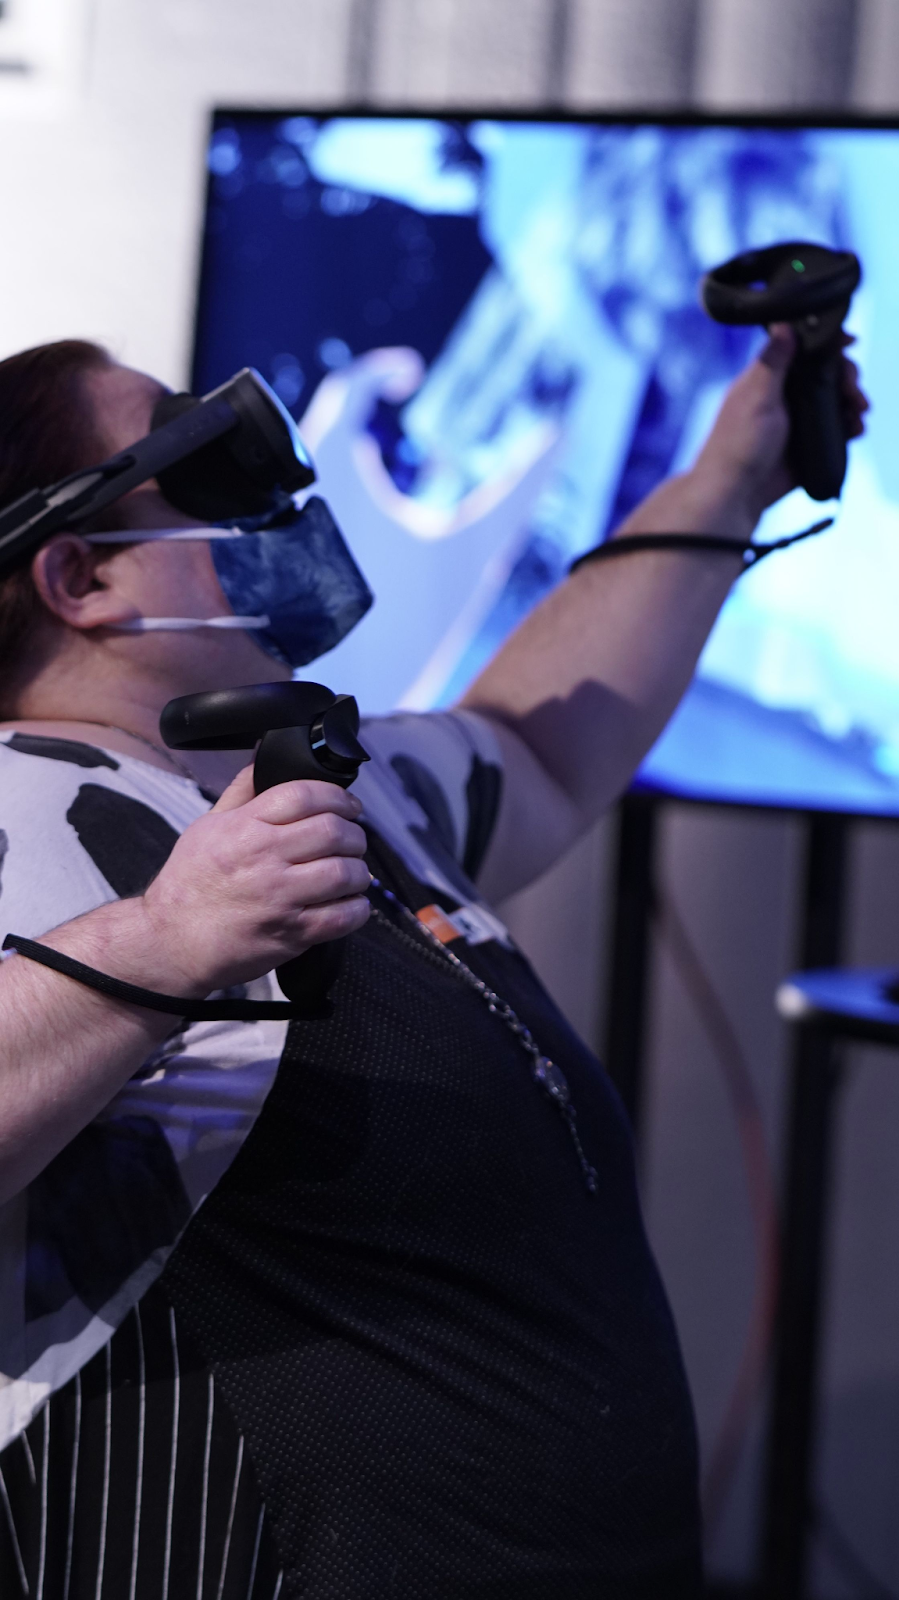 a white woman wearing a black-and-white dress, stands in front of a screen that shows her perspective in a virtual world. Scott is wearing a VR headset and carries one controller in each of her hands, one of which is held above her head as if pointing to something